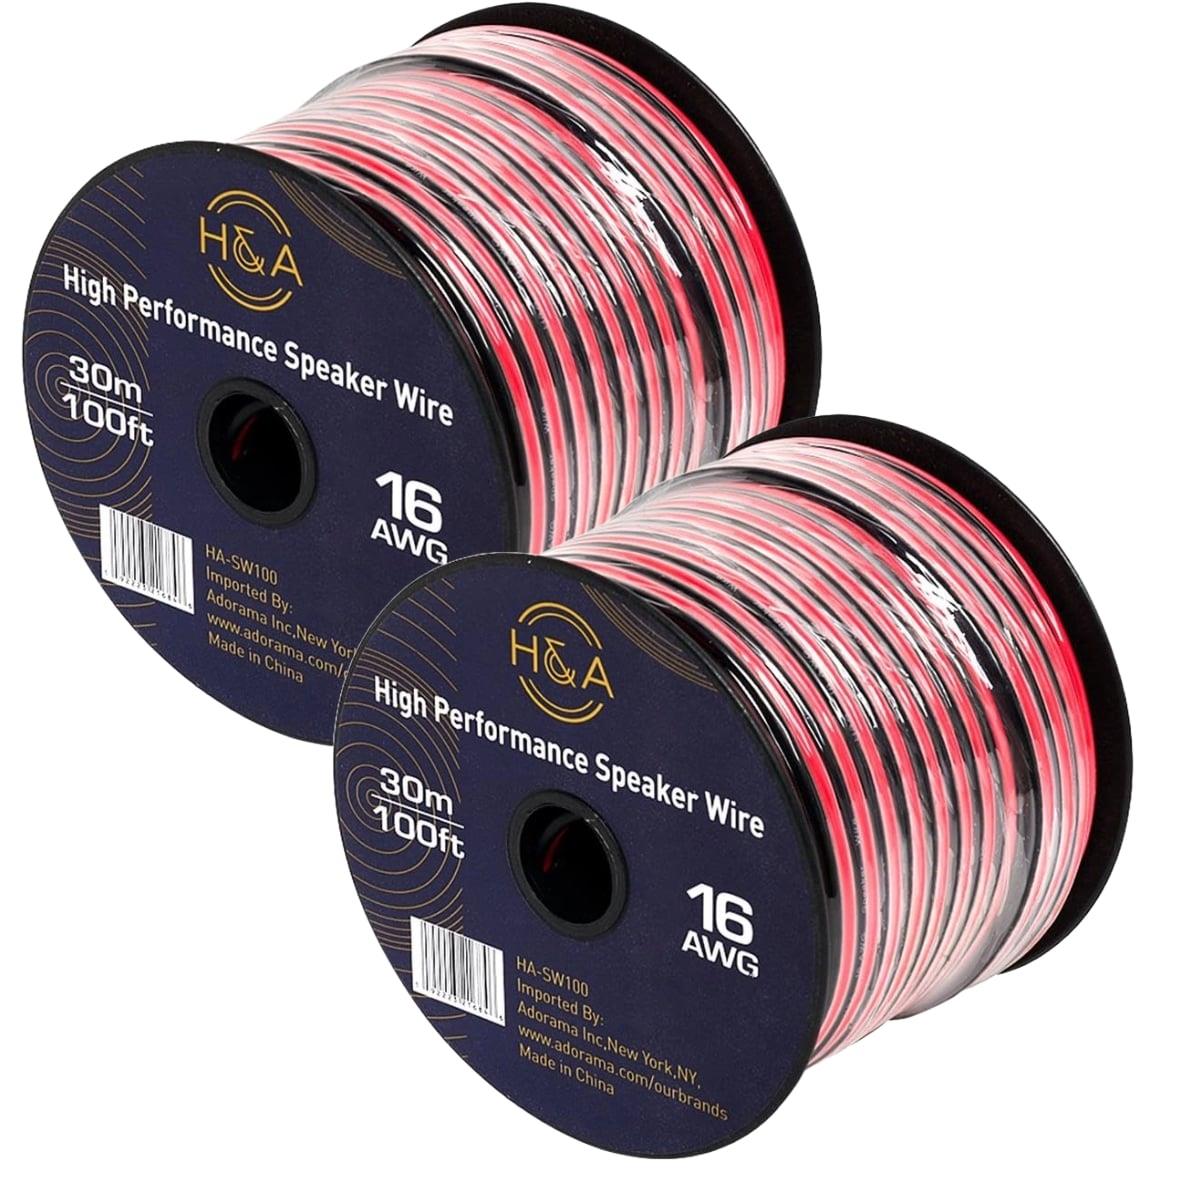 Image of H&amp;A 16 AWG Speaker Wire Cable (100' Per Spool) 2 Pack